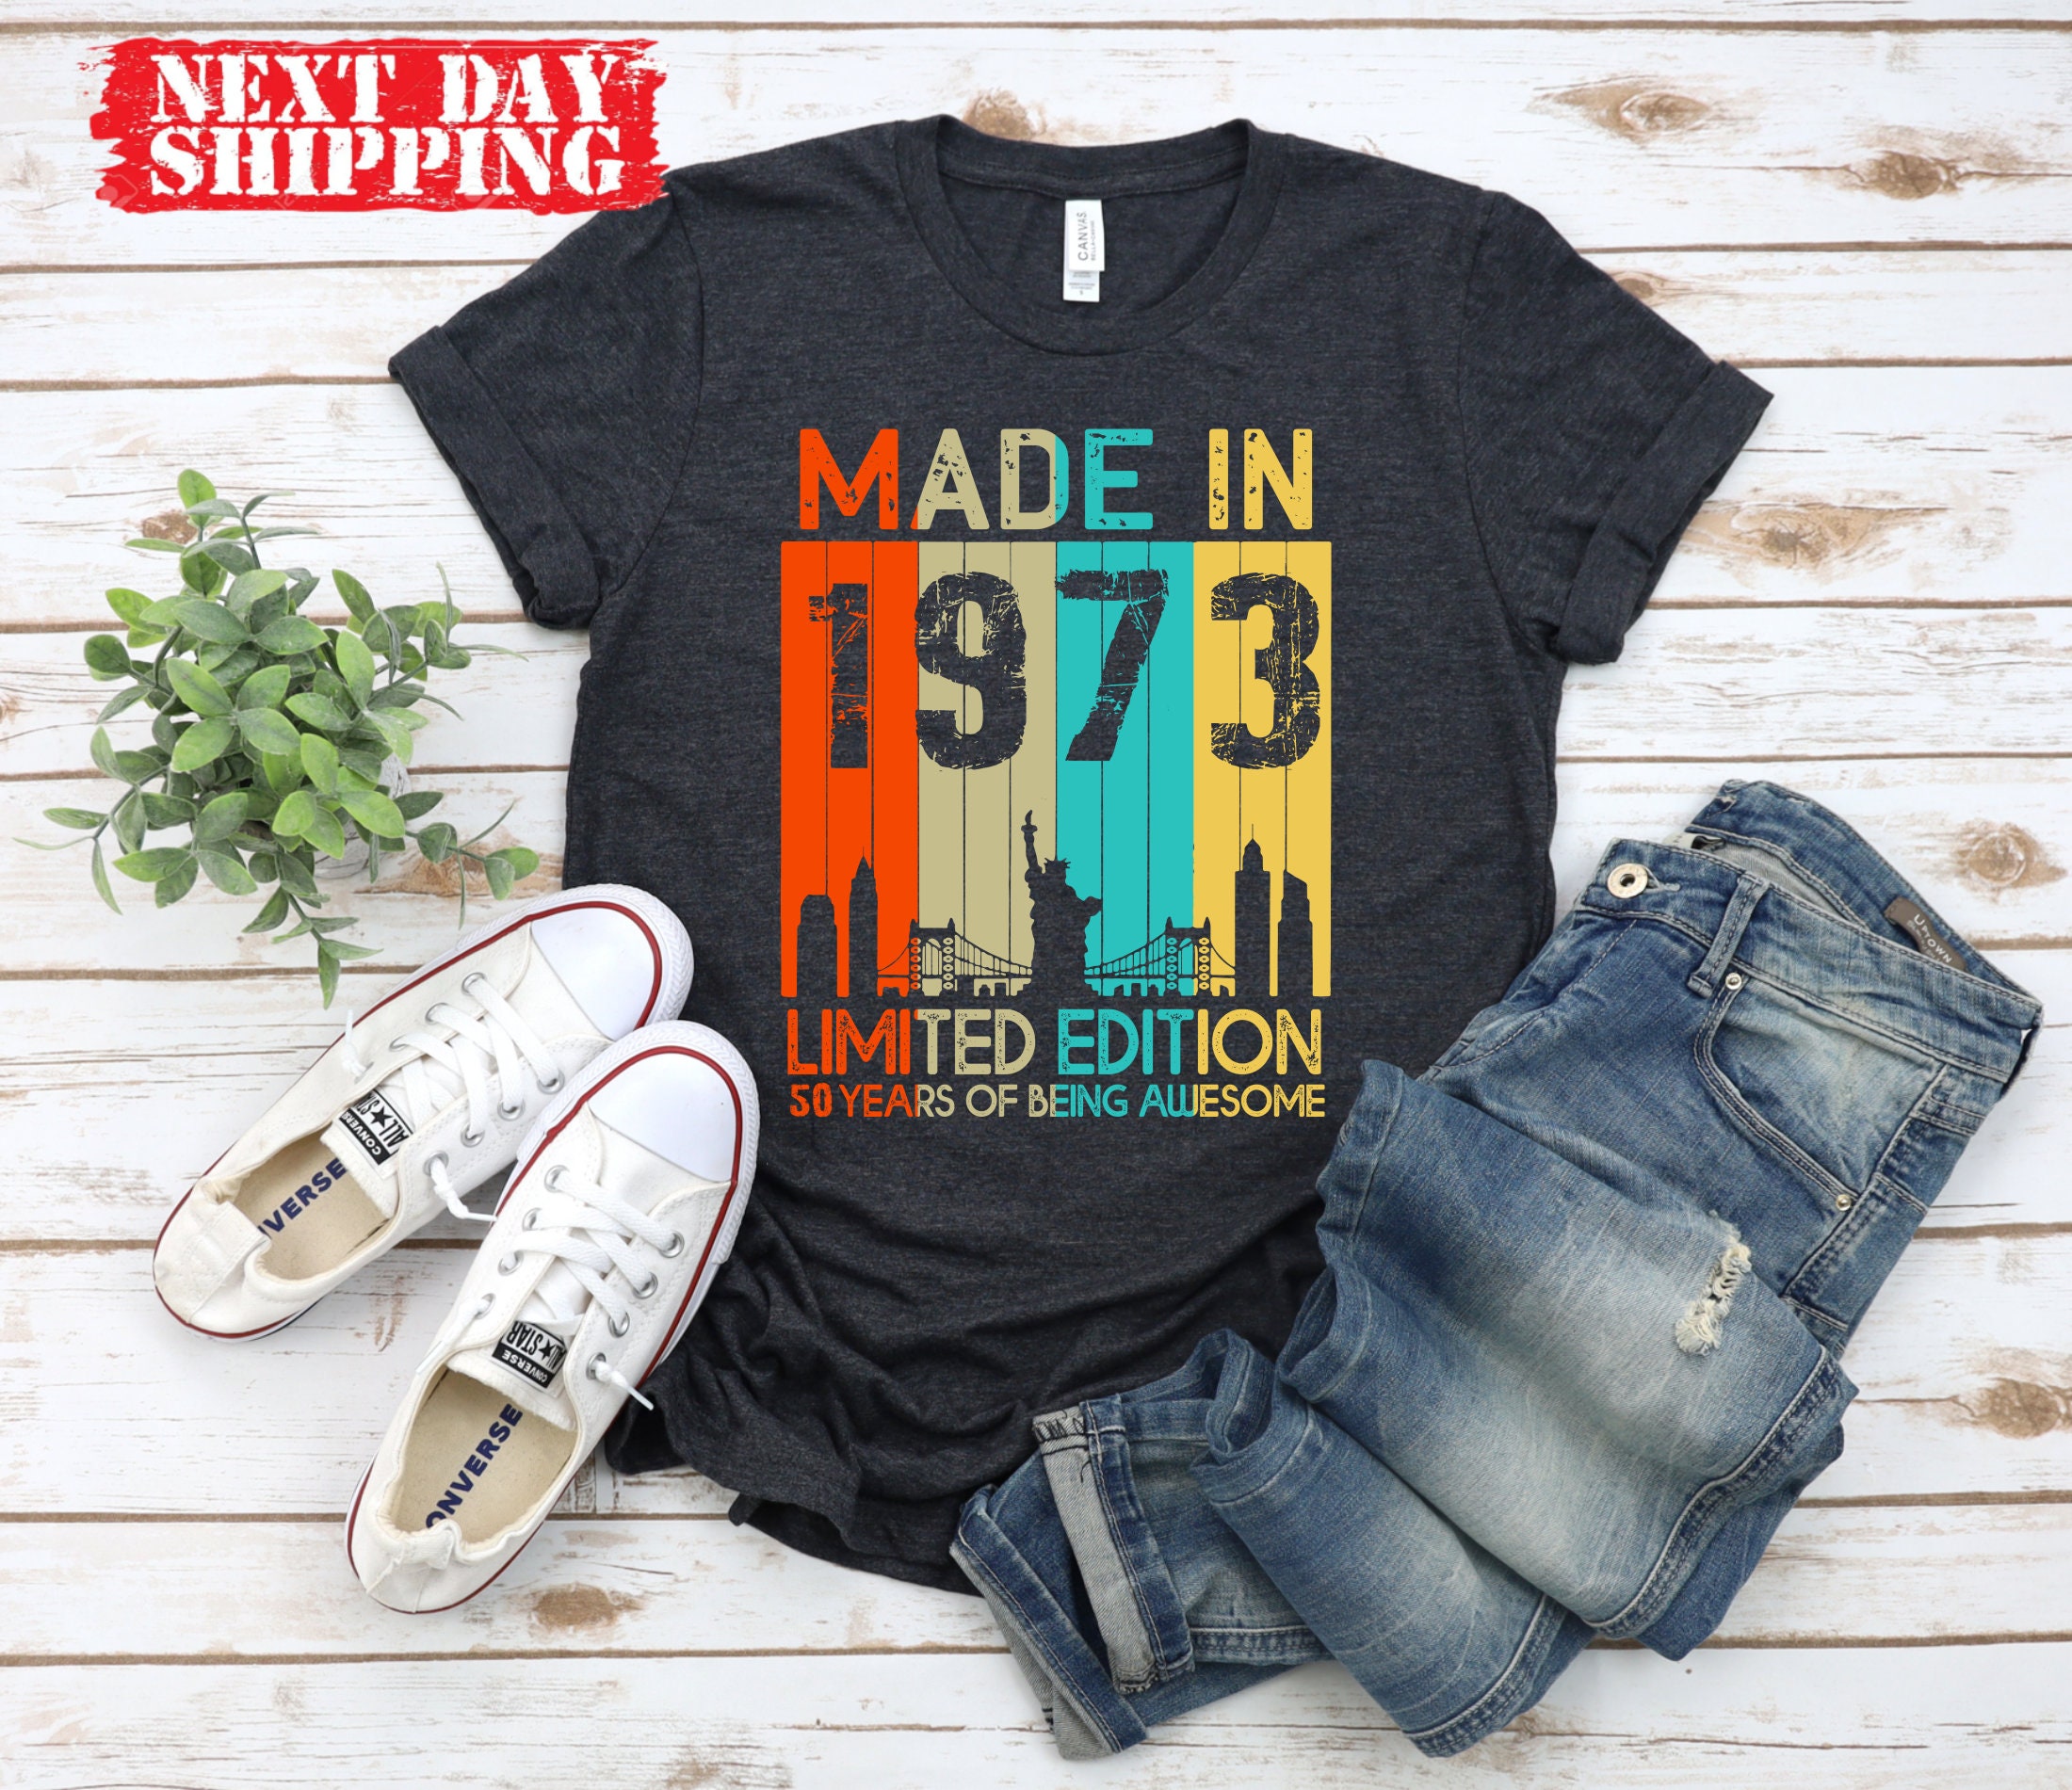 Made in 1973 Limited Edition 50 Years of Being Awesome - Etsy